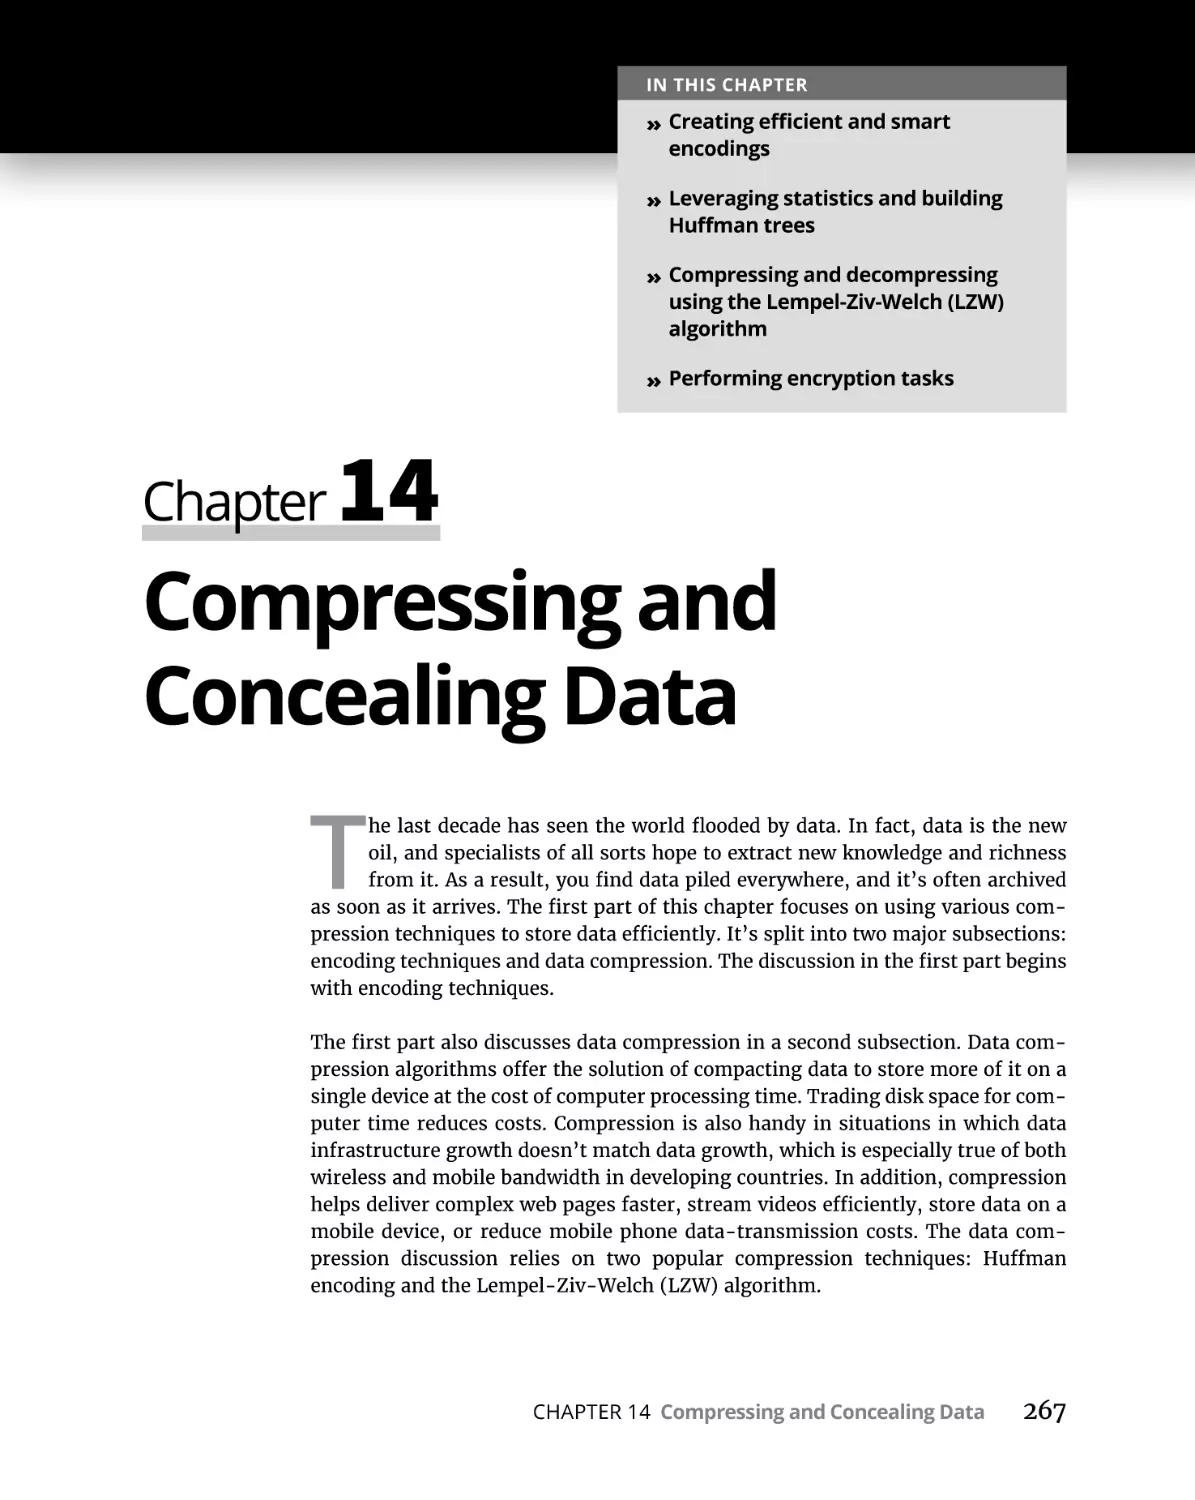 Chapter 14 Compressing and Concealing Data